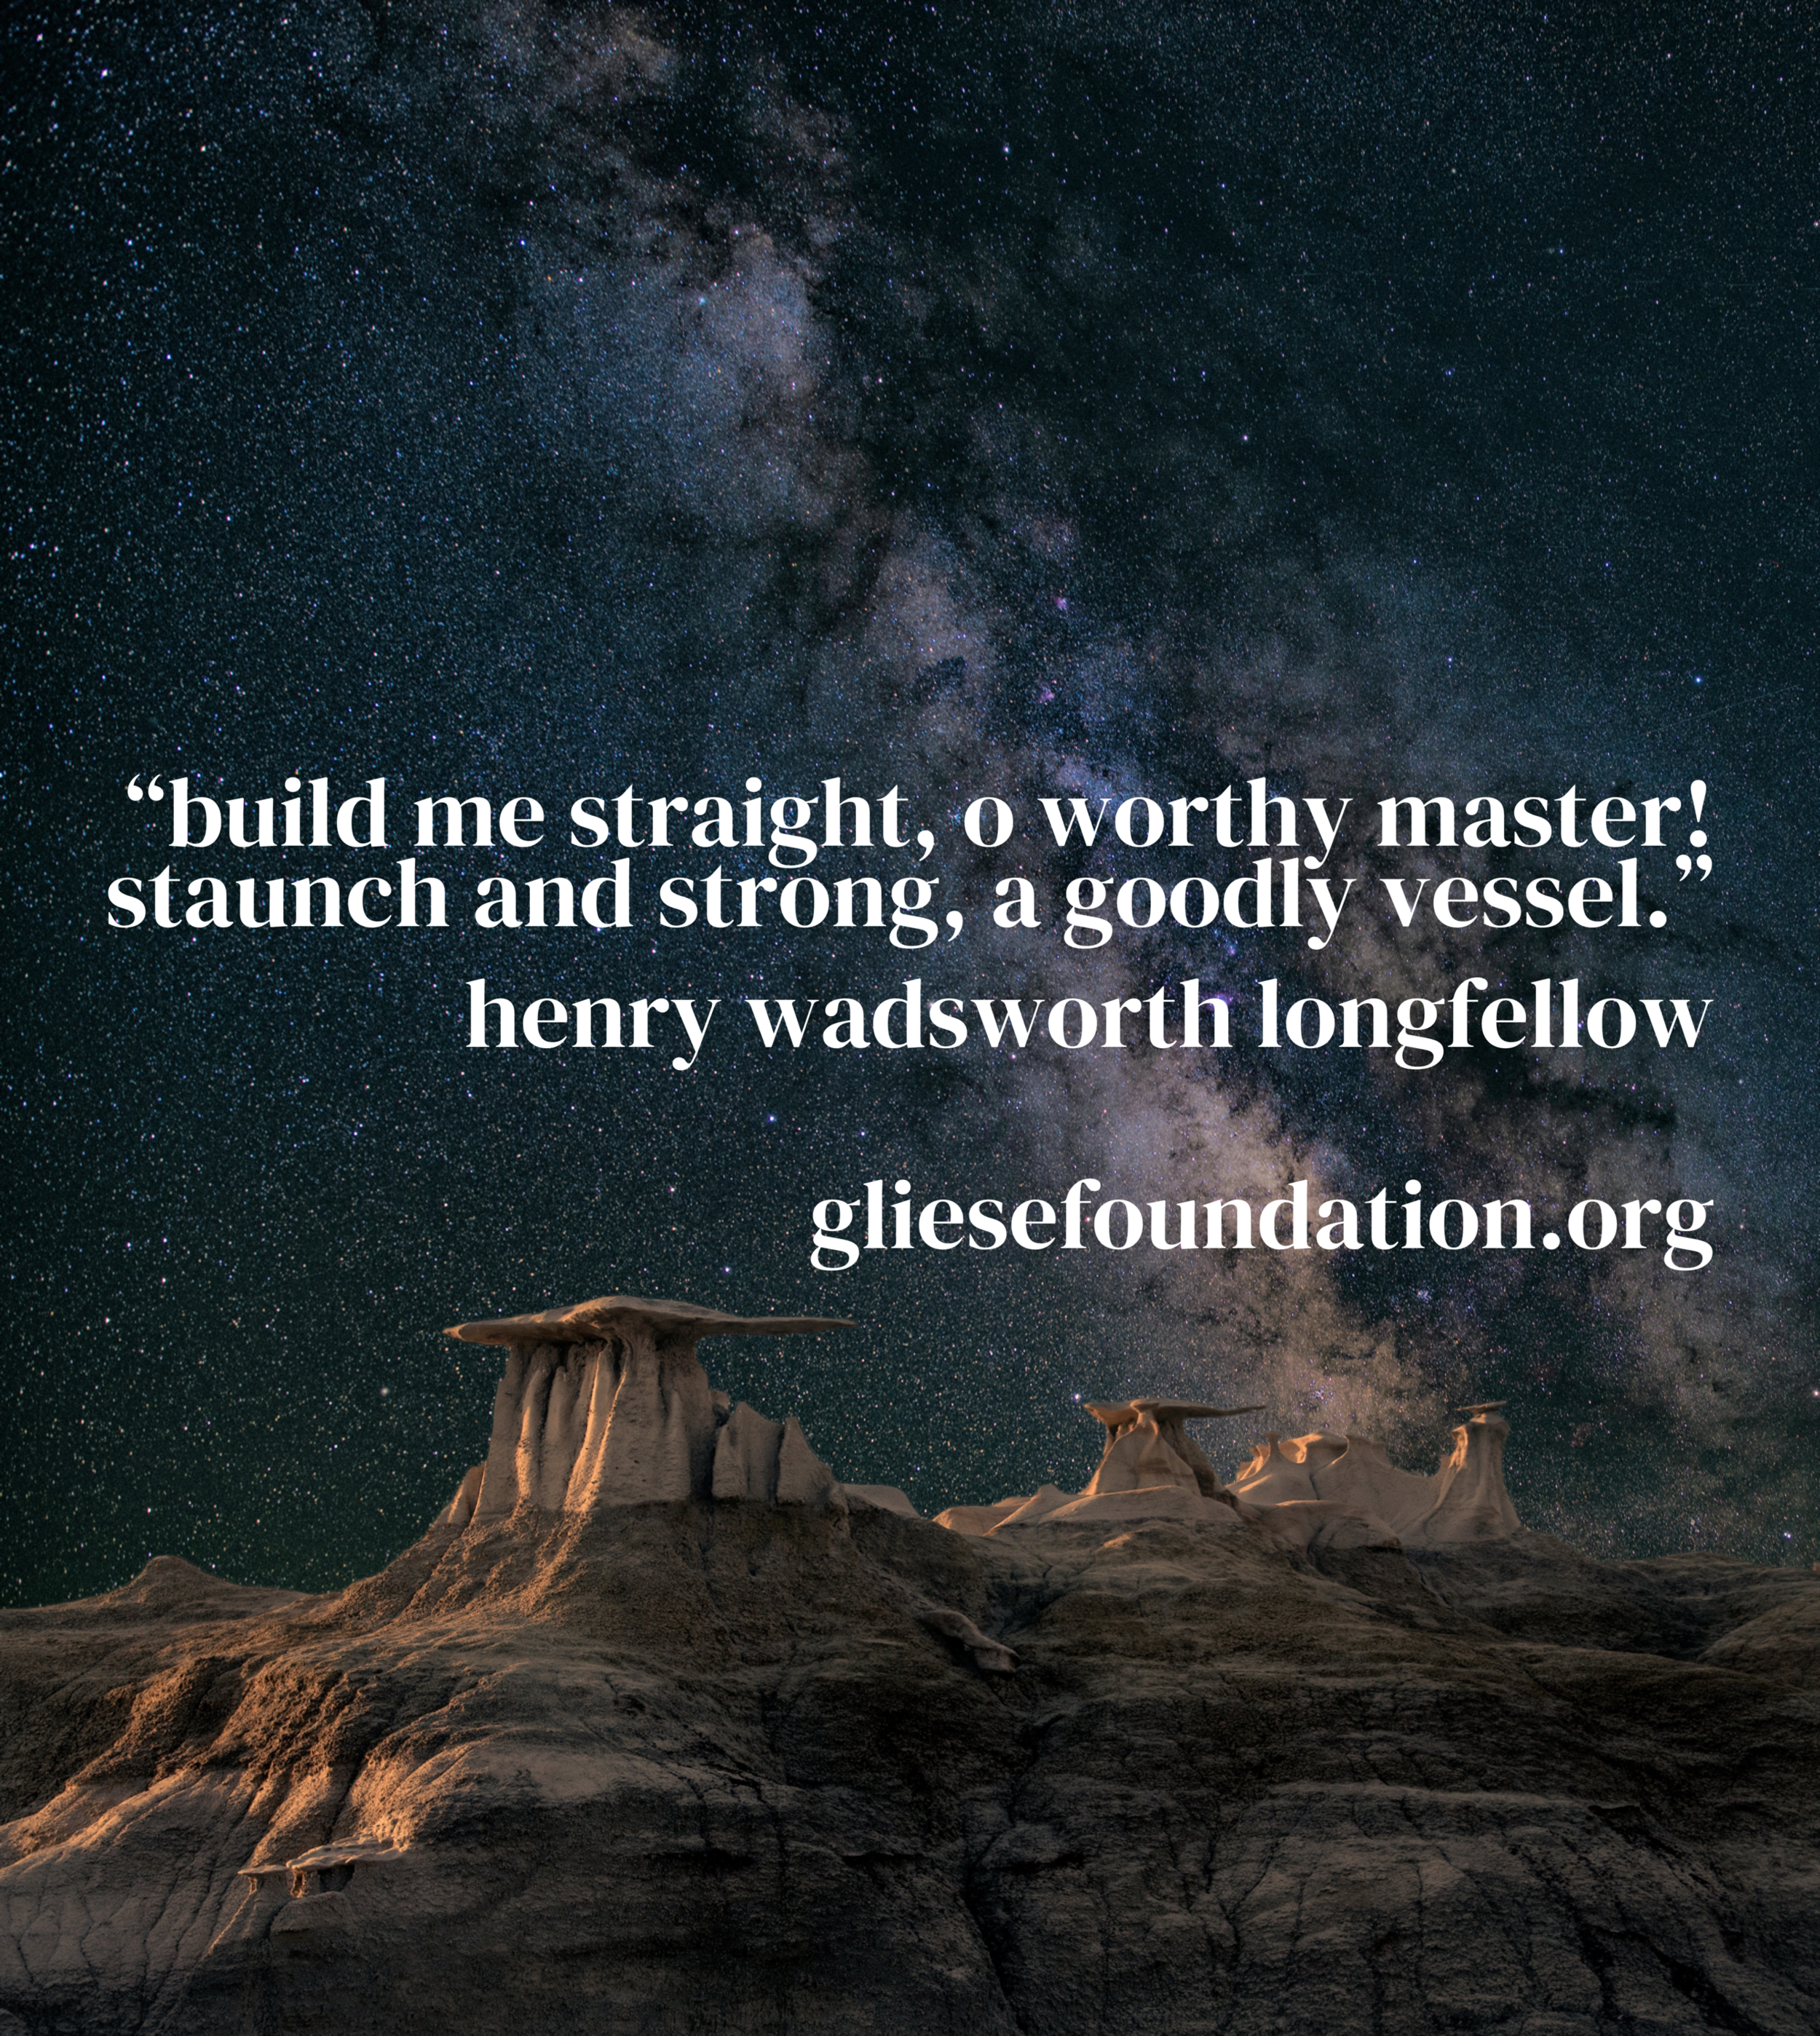 Henry Wadsworth Longfellow 1.PNG